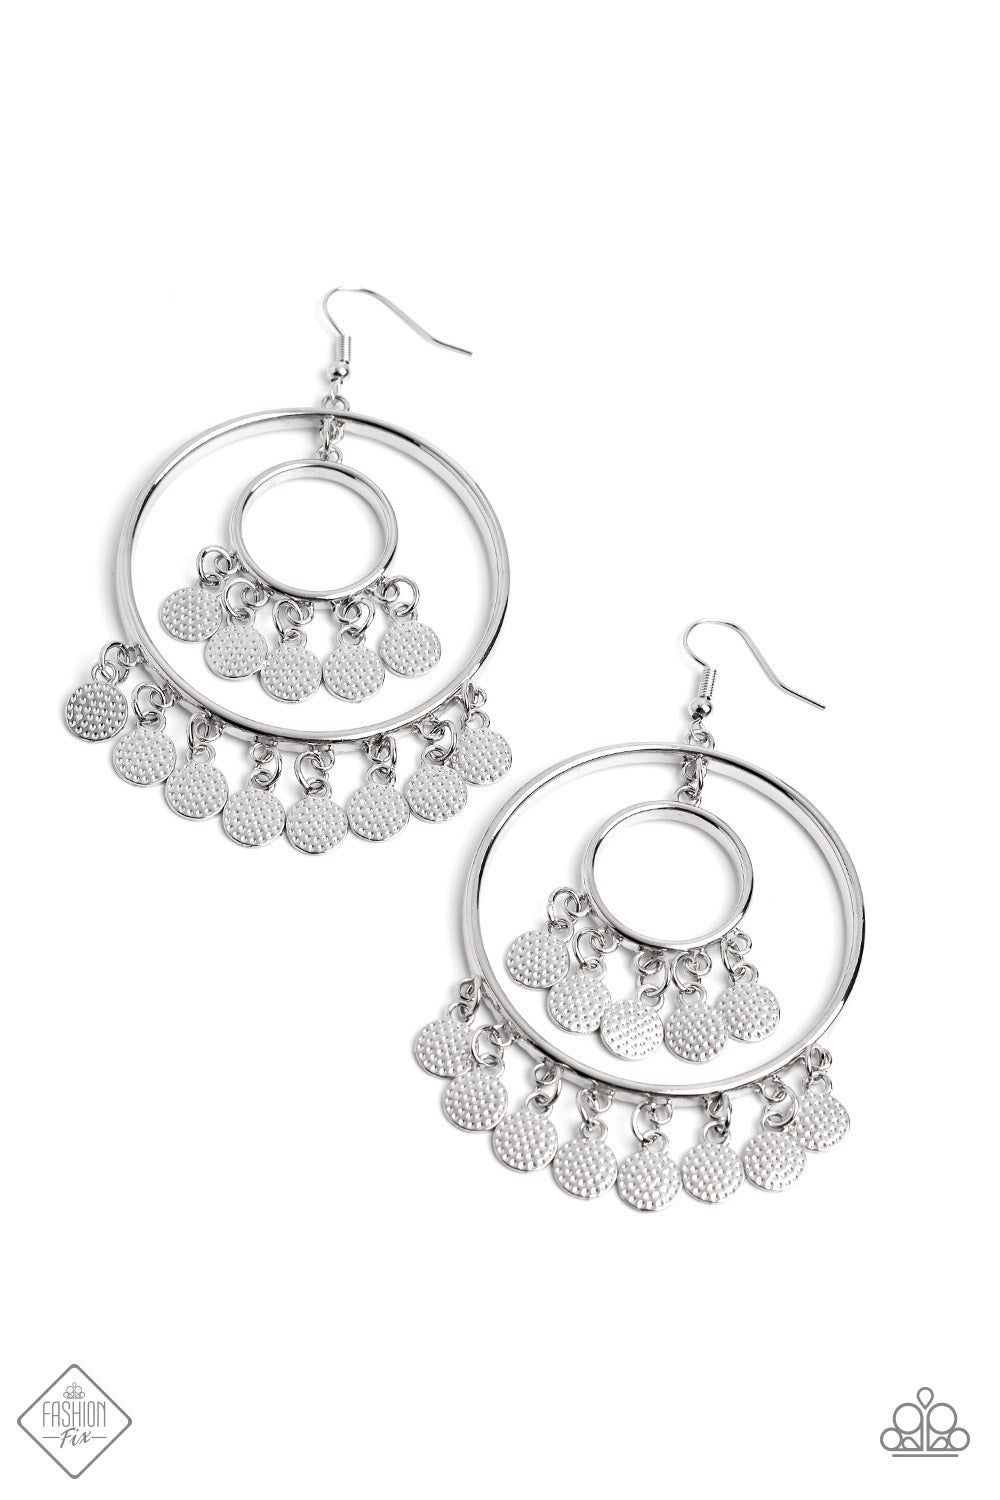 Caviar Command - Silver Earrings - Paparazzi Accessories - Silver discs, hammered with studded details, trickle from the bottom of an oversized sleek silver hoop, creating an elegant lure. A smaller hoop with a similar sheen, swings from the top of the oversized hoop, which features even more dangling discs for additional eye-catching movement. Earring attaches to a standard fishhook fitting. Sold as one pair of earrings.